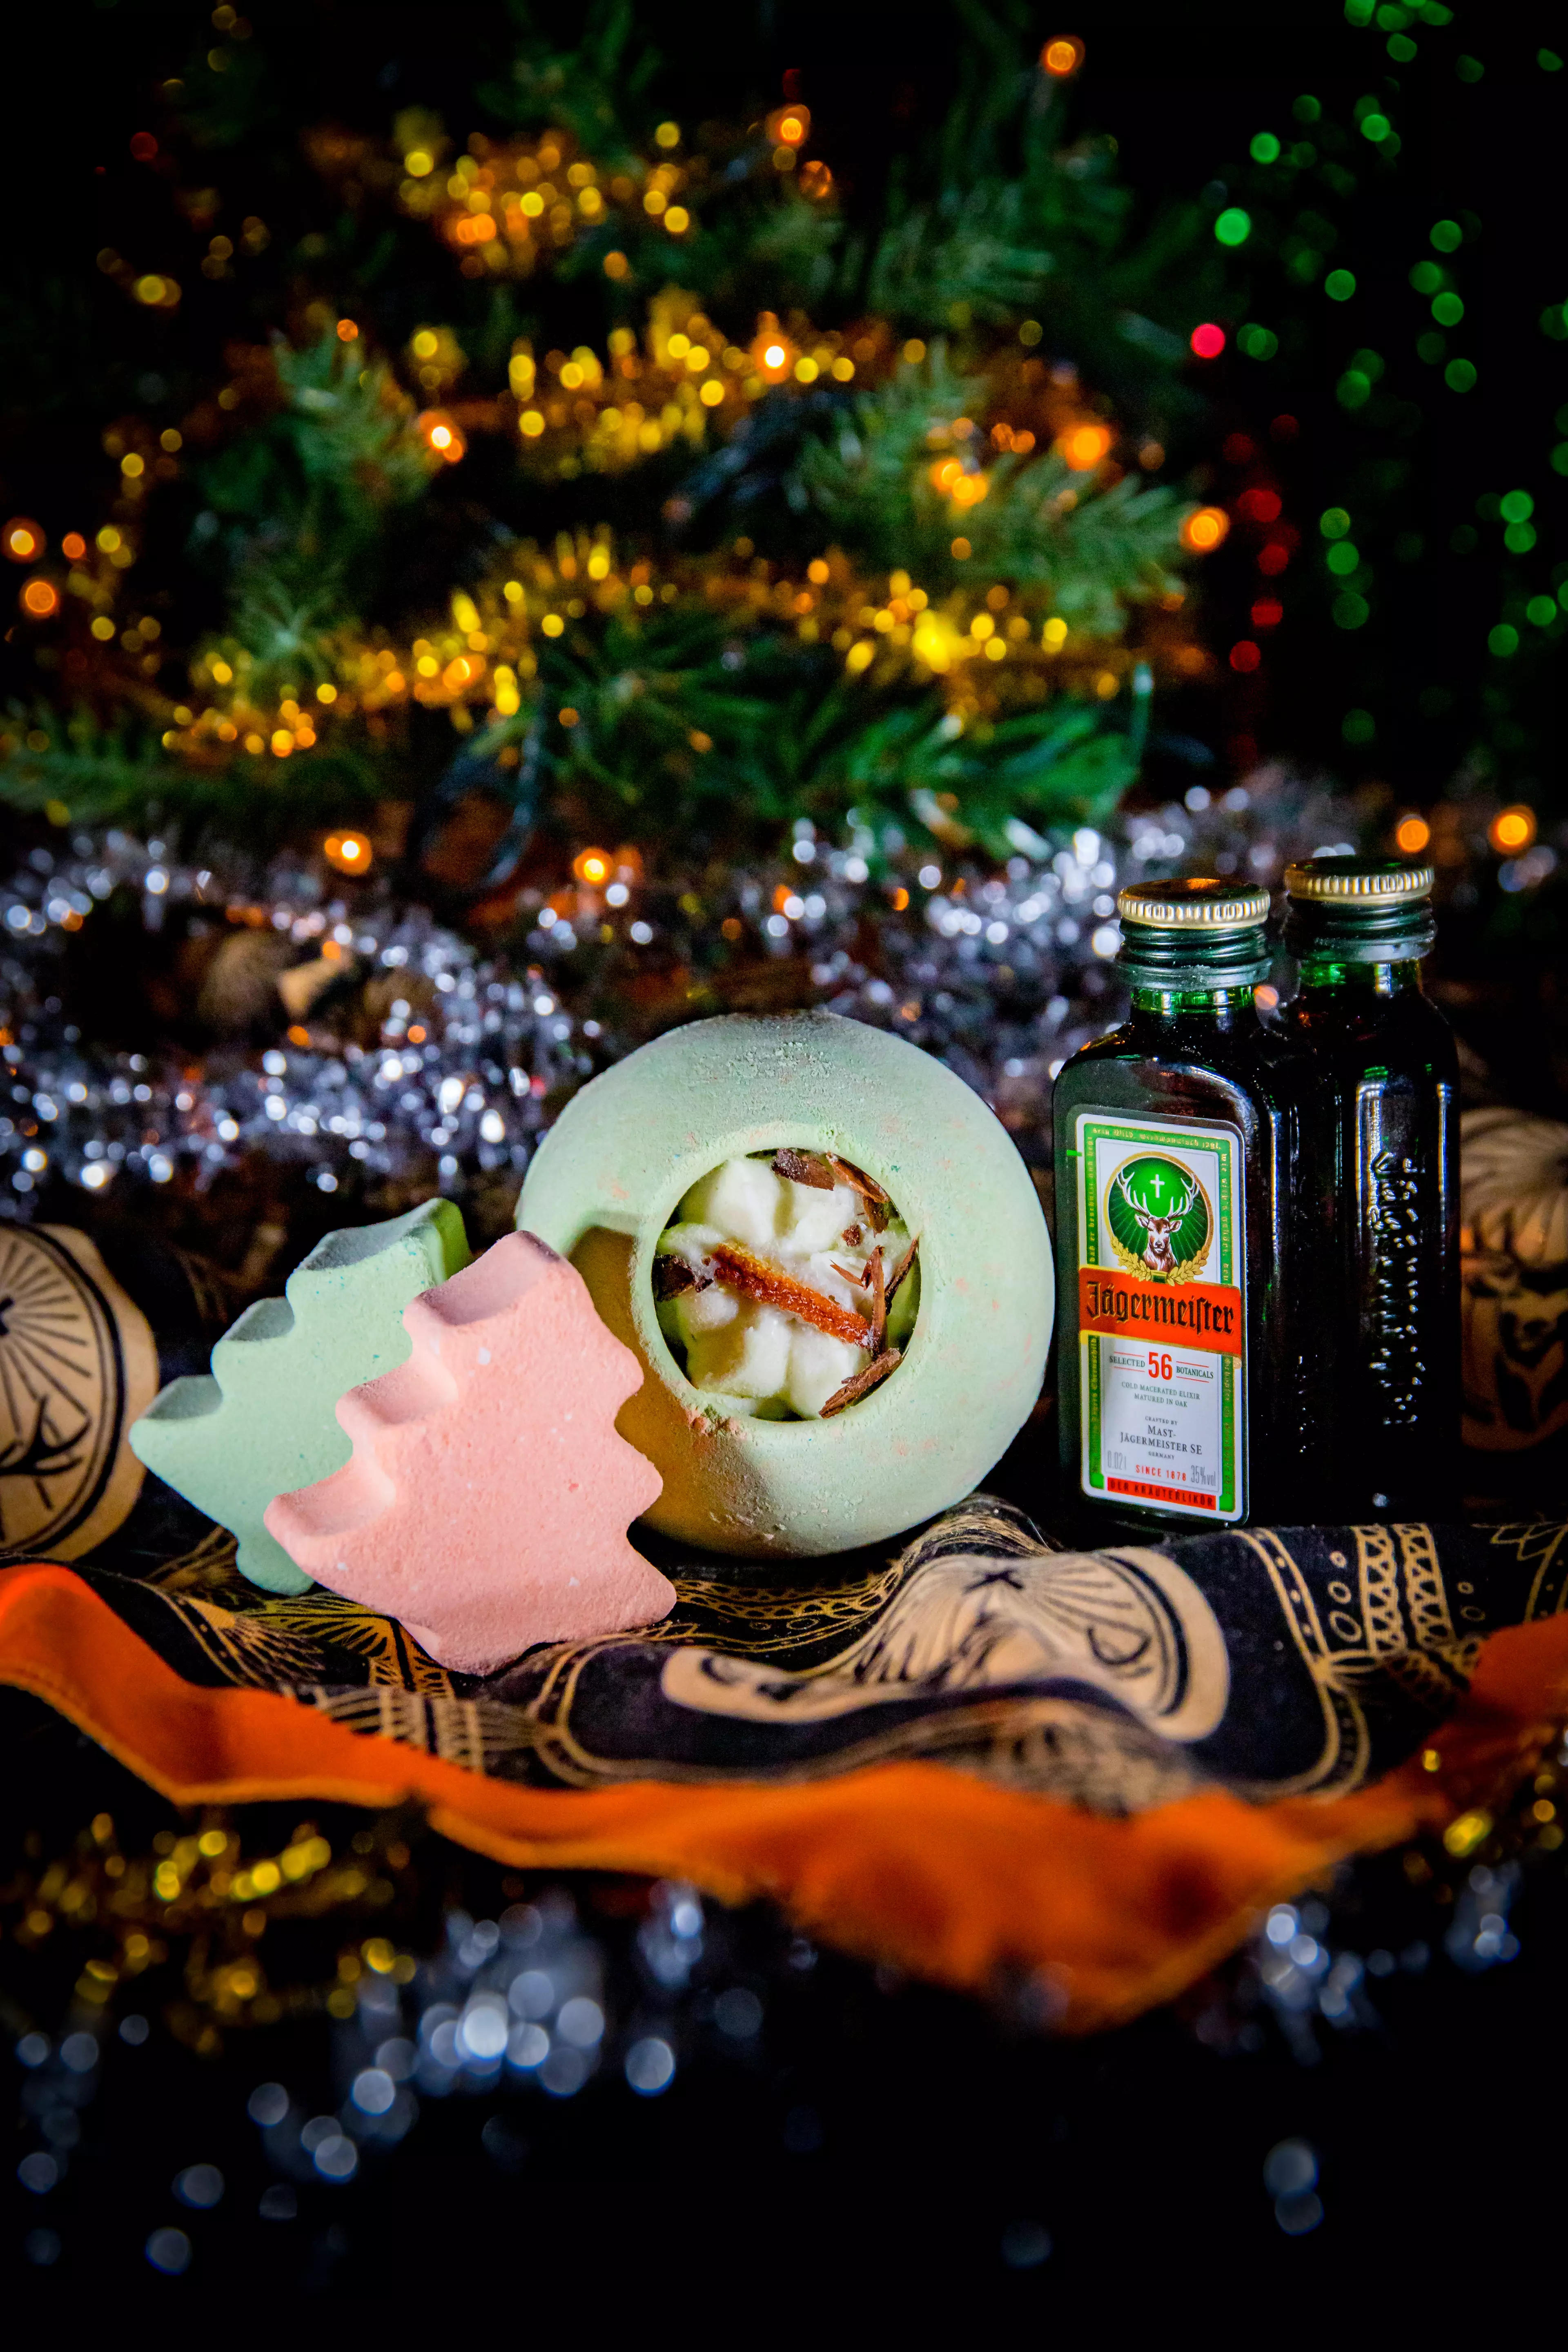 Each pack includes 3 bath bombs and a 2cl bottle of original Jägermeister, Jägermeister cold brew coffee and bandana (